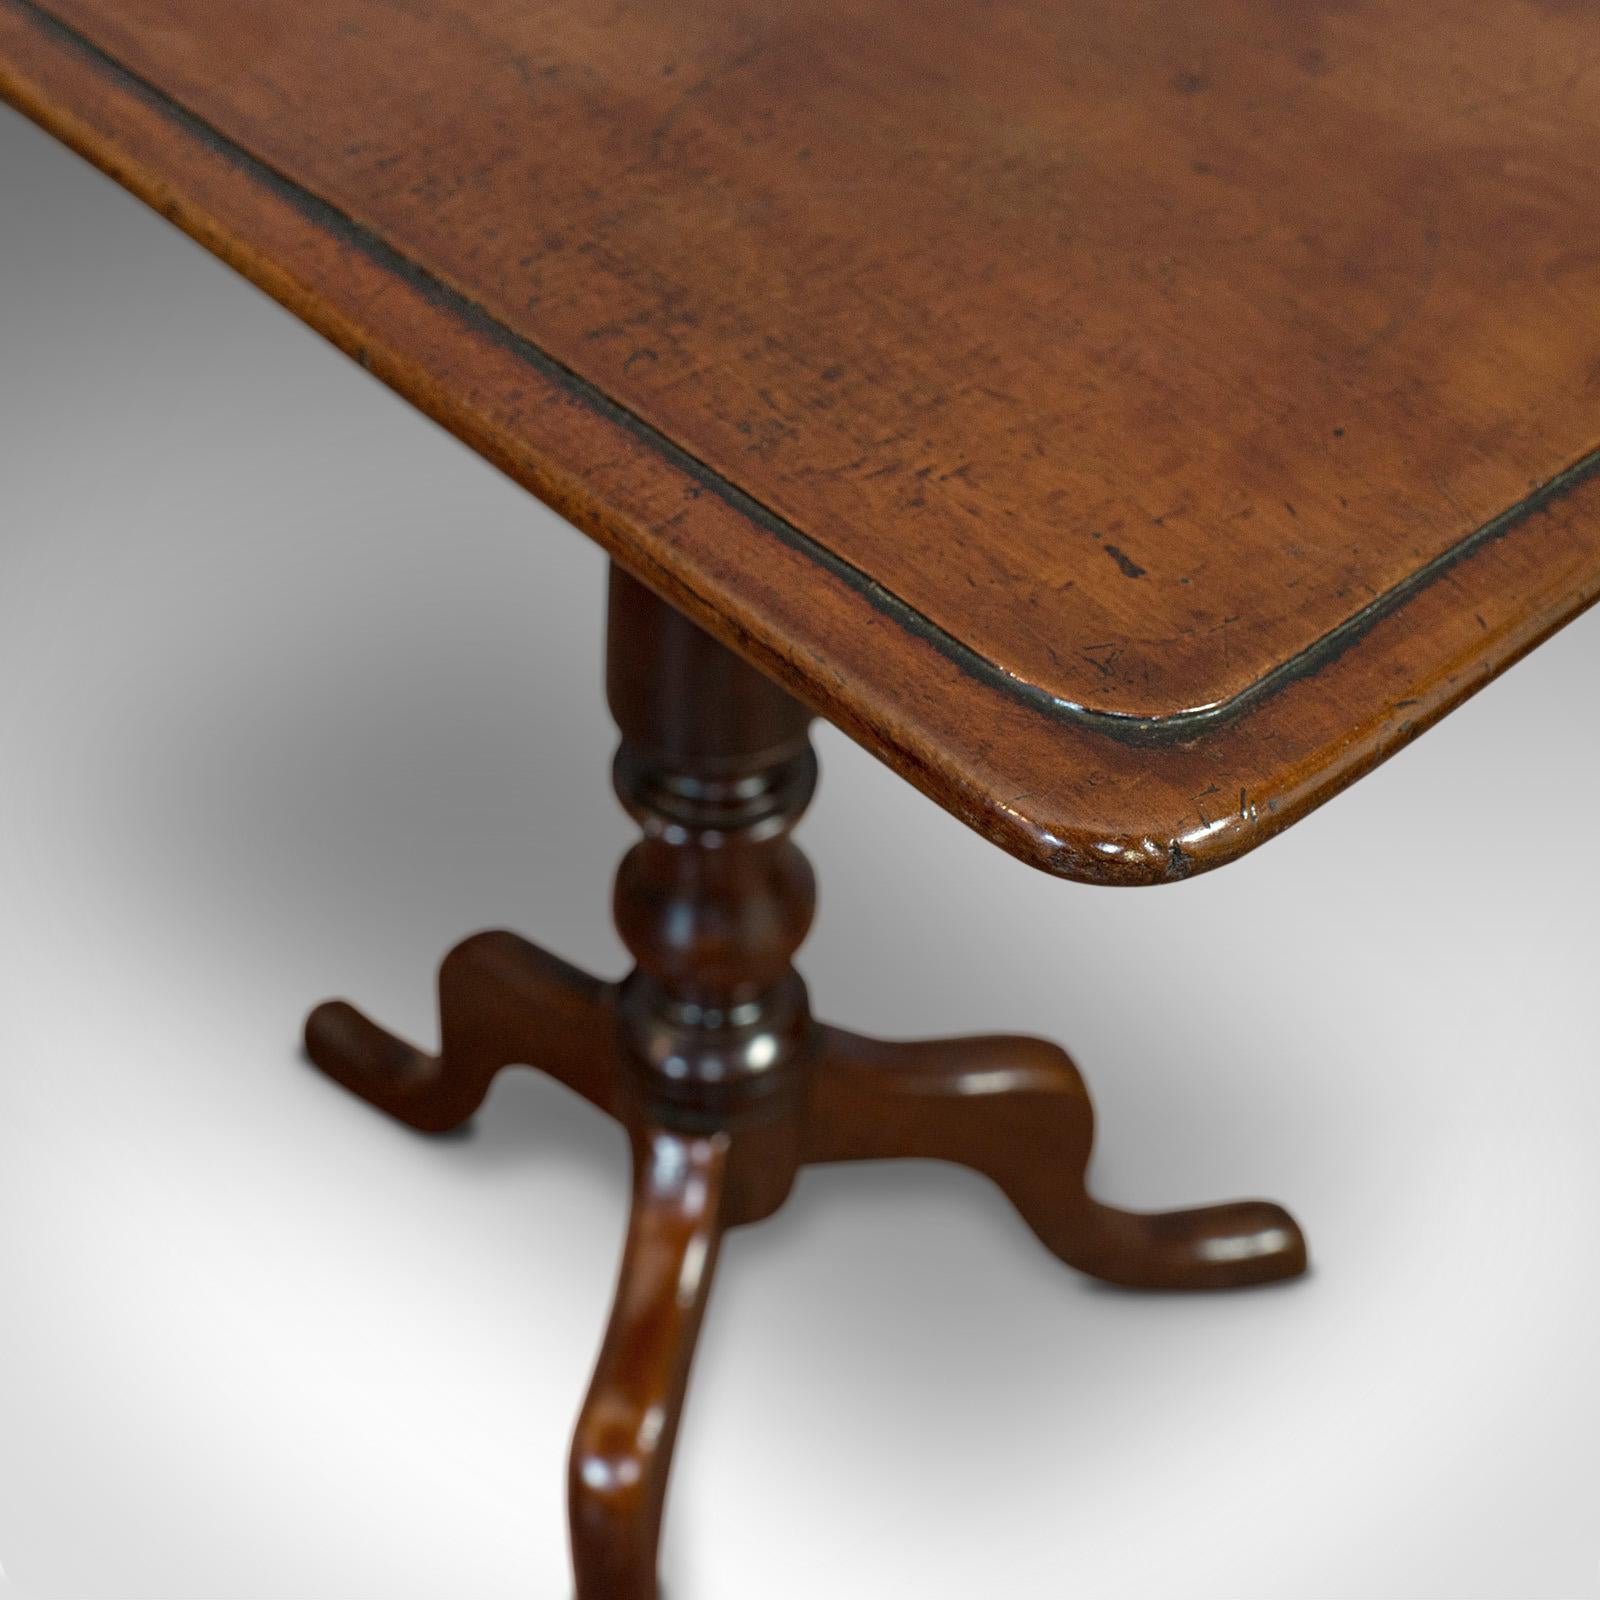 Antique Wine Table, English, Mahogany, Side, Lamp Stand, Victorian, circa 1870 2